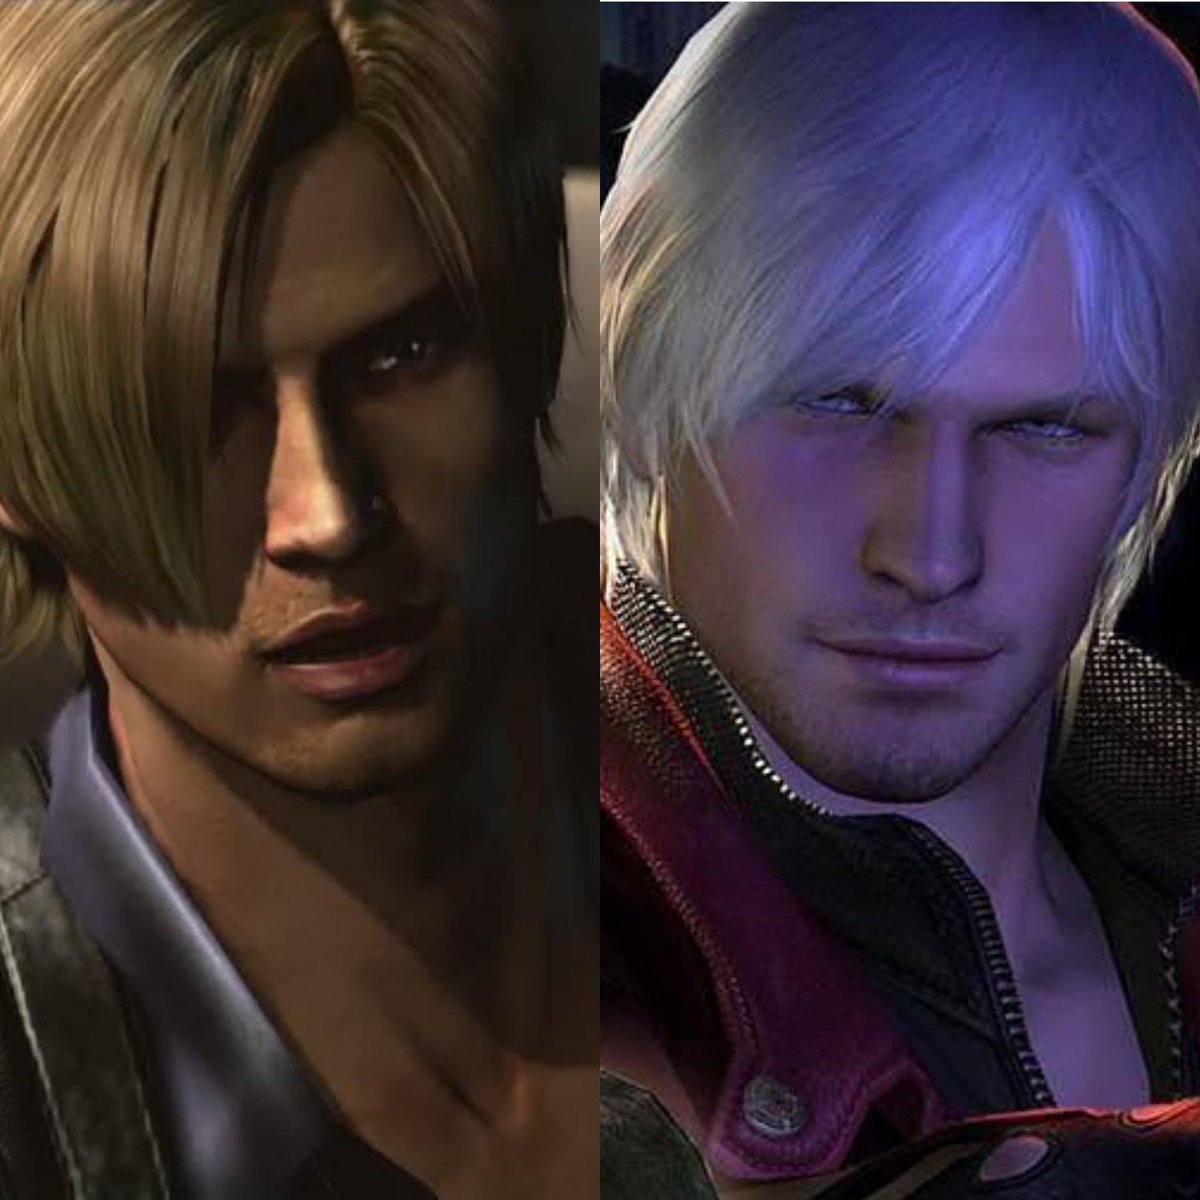 I love the art, but it reminds me of how Dante and Leon had identical faces at one point 😭